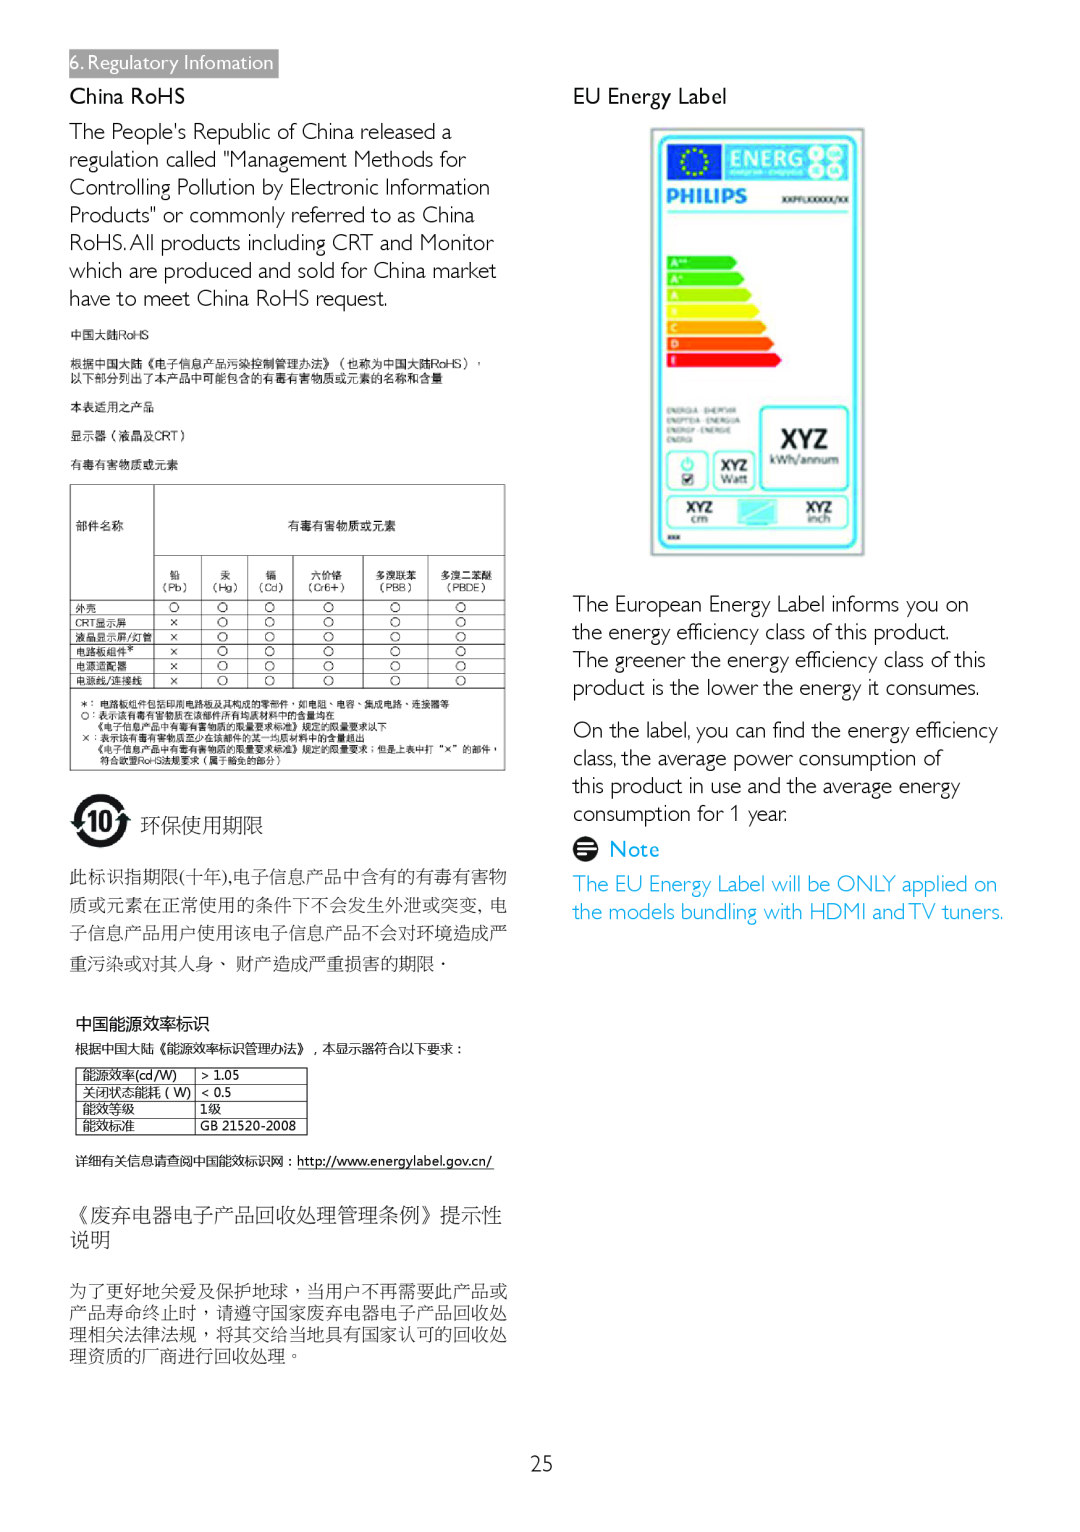 Philips 246V5 China RoHS, EU Energy Label, this product in use and the average energy consumption for 1 year, 环保使用期限 